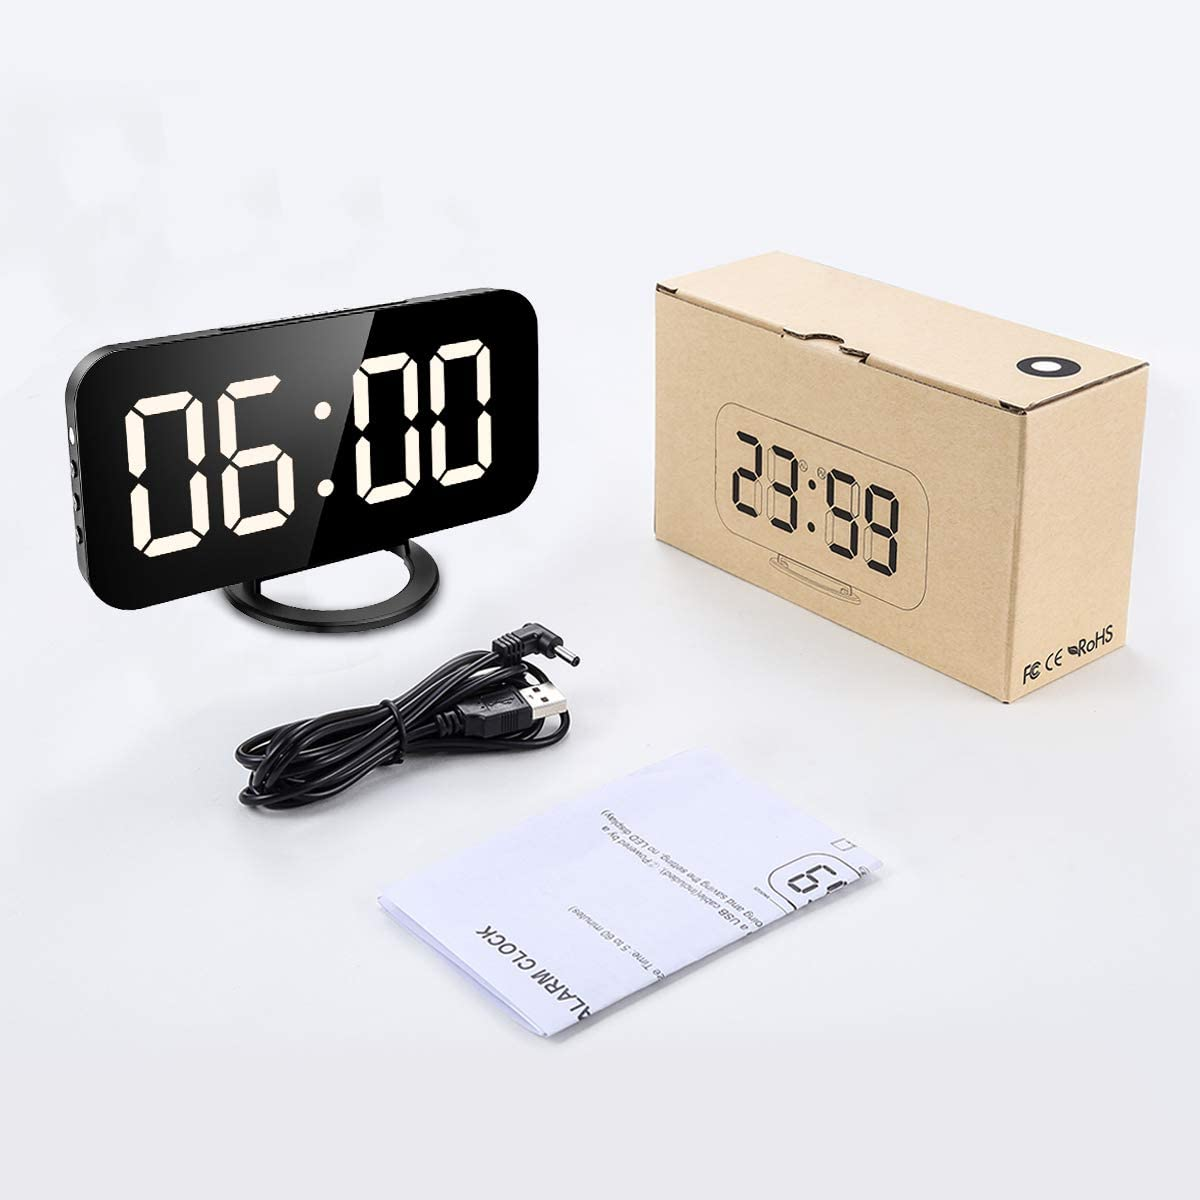 Digital Alarm Clock, Newest Version 6.5" Large Mirror Surface LED Clocks with Dual USB Charger Ports, Auto/Custom Brightness, 12/24H Display with Snooze Function for Bedroom Home Office (Black-White)